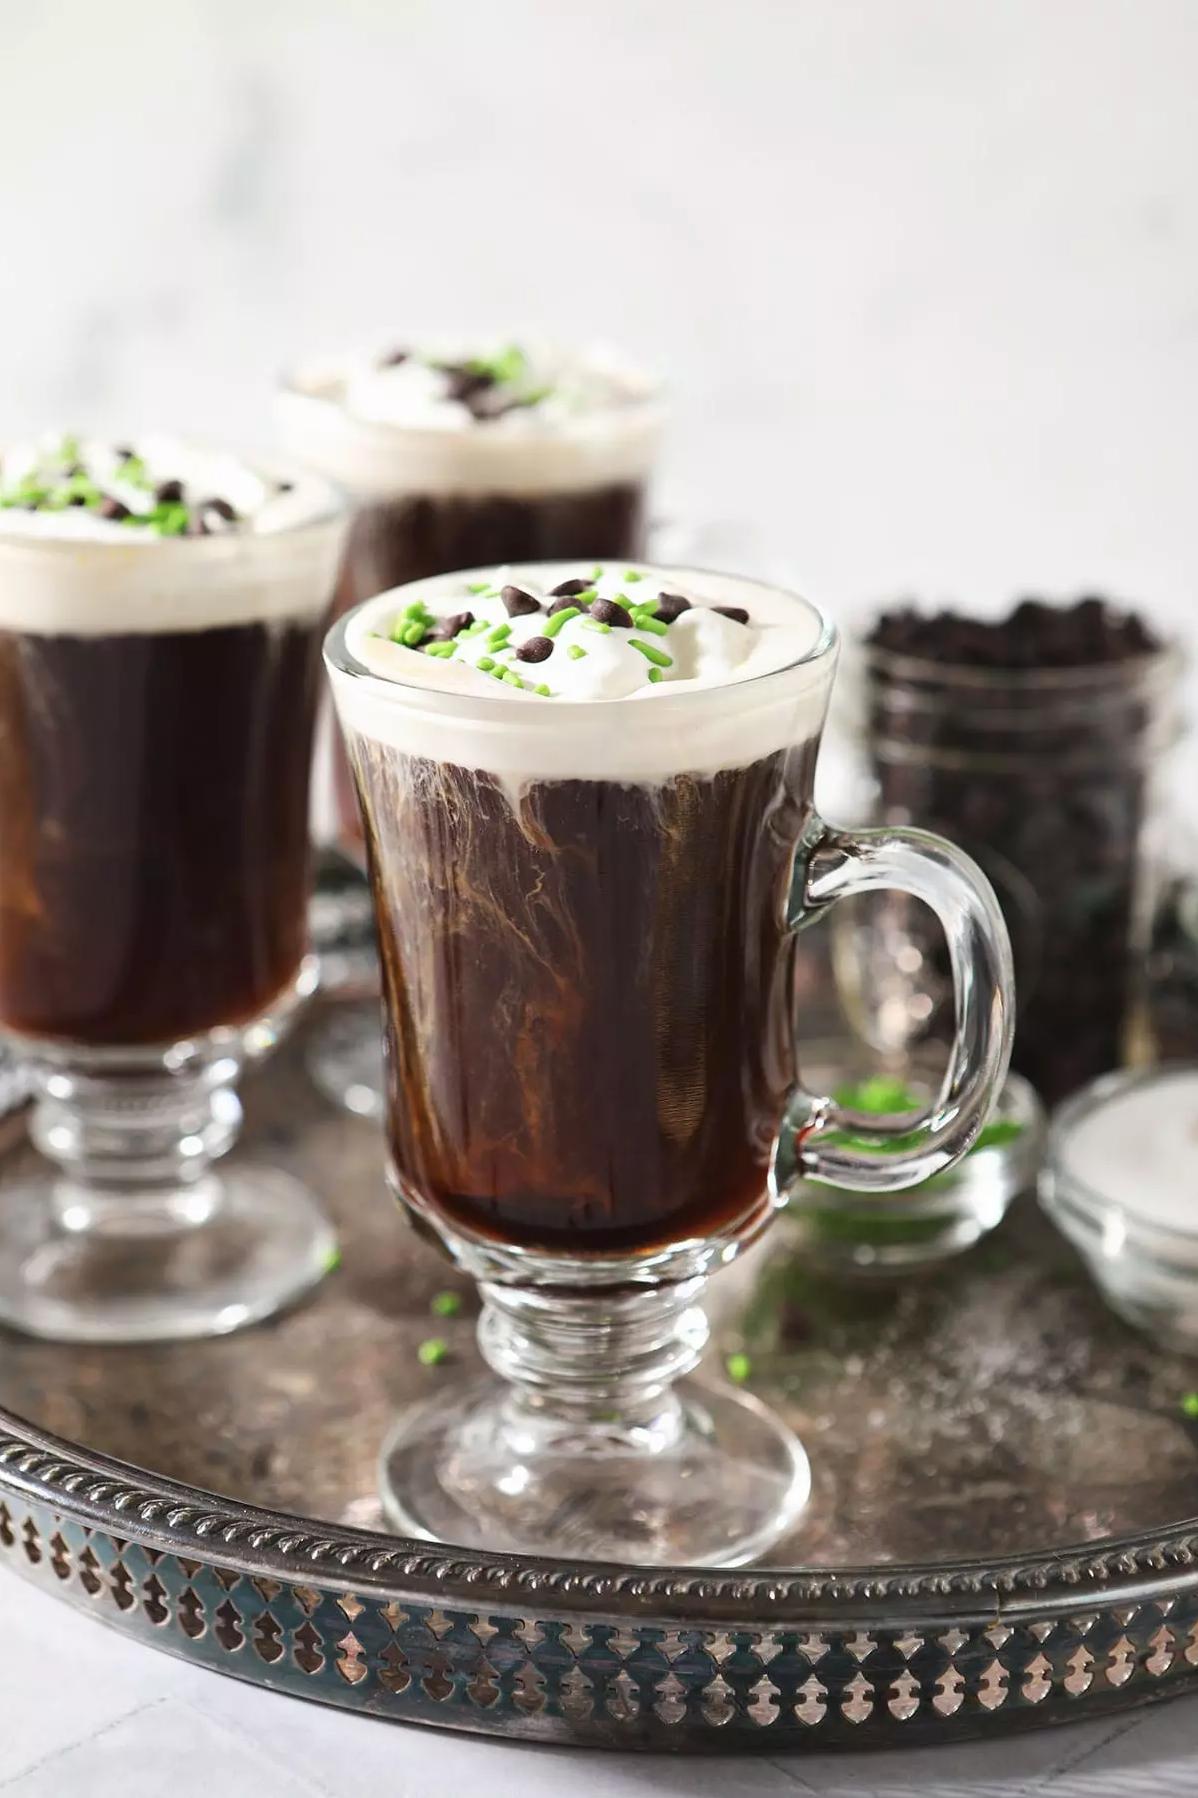  Irish Coffee can be served as a dessert or a digestif after dinner.